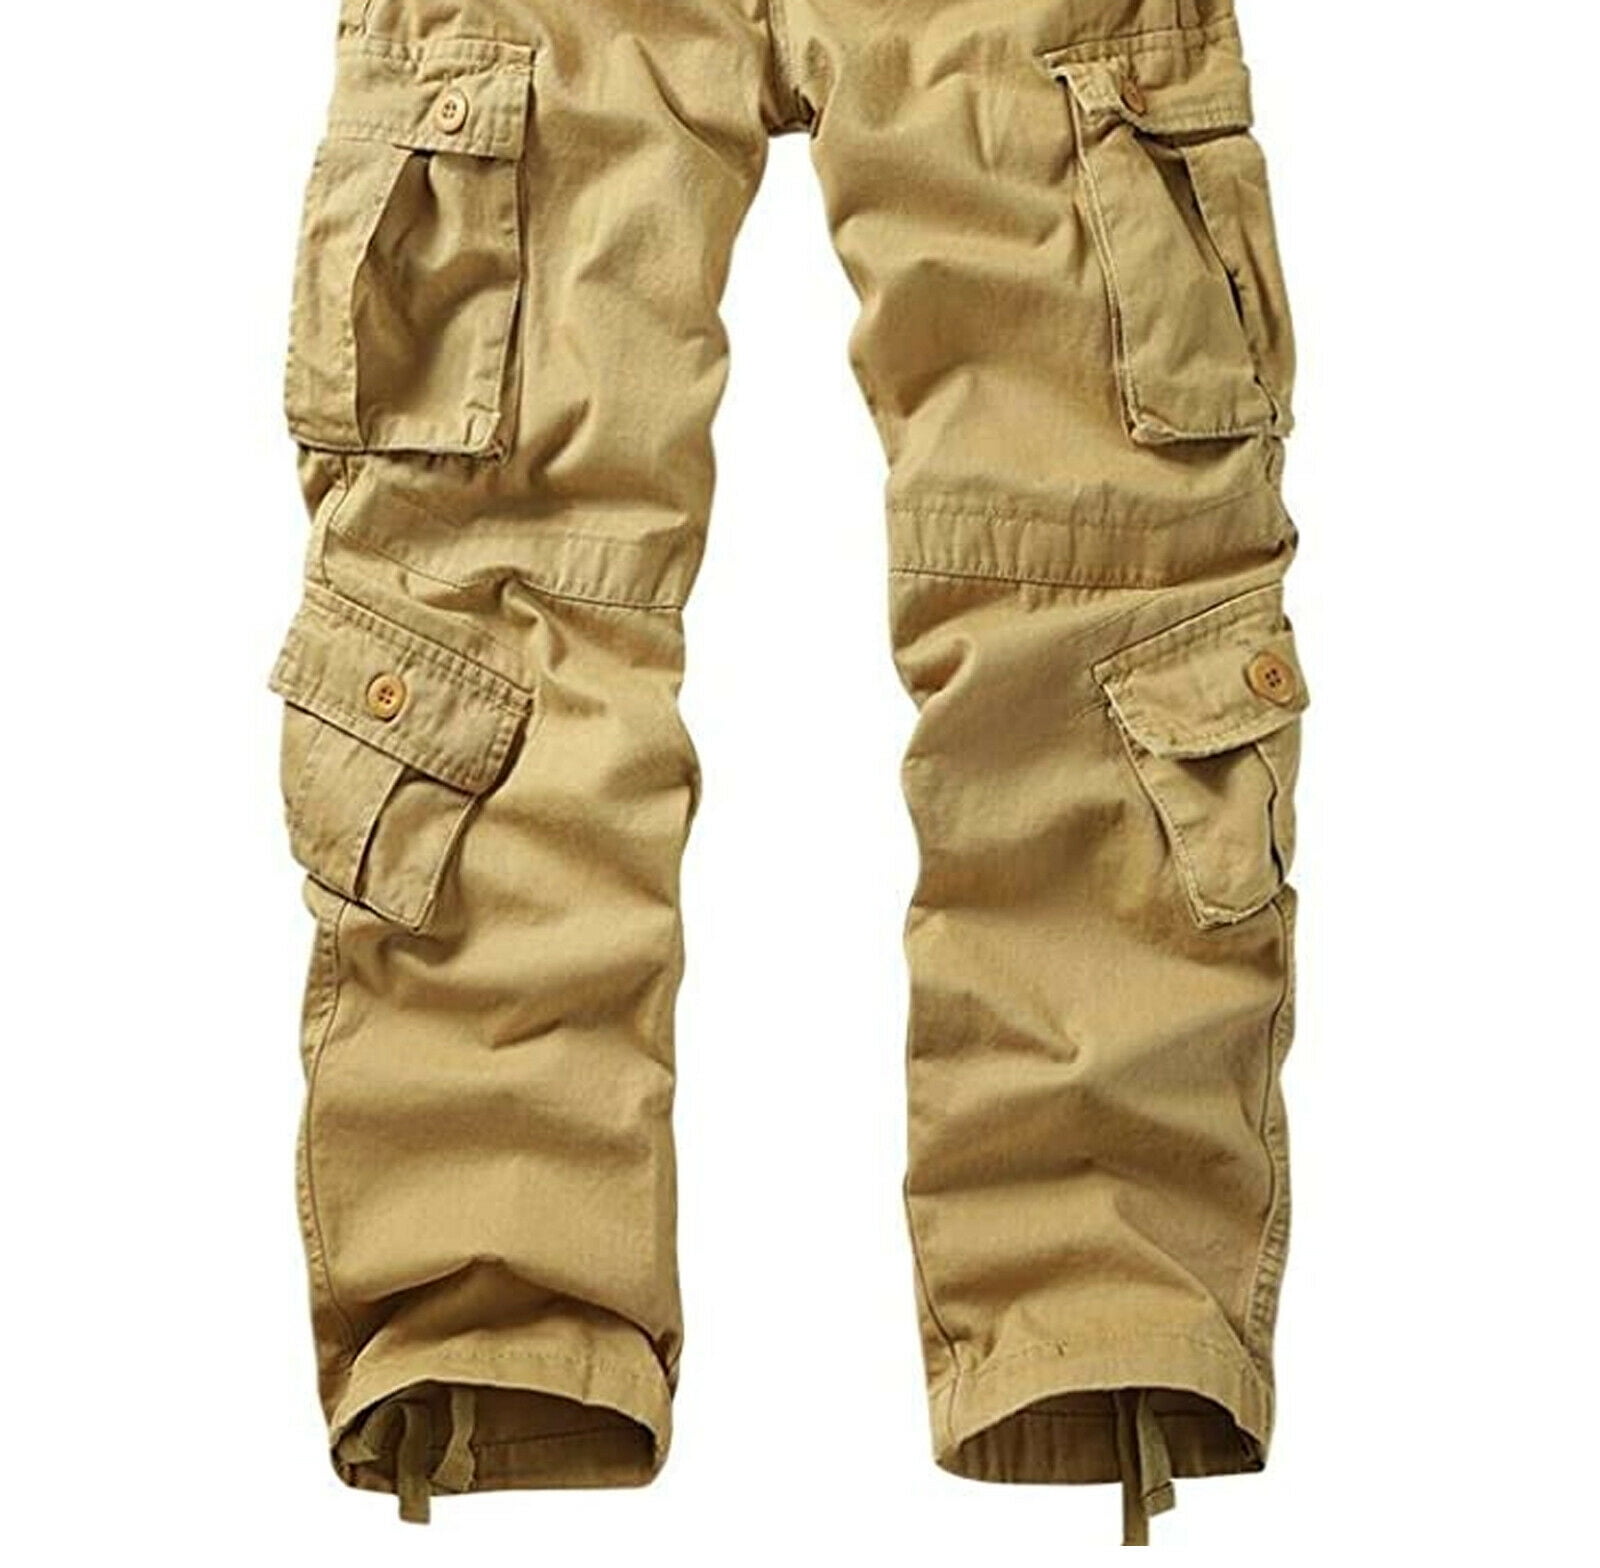 Discover more than 85 mens military trousers super hot - in.cdgdbentre